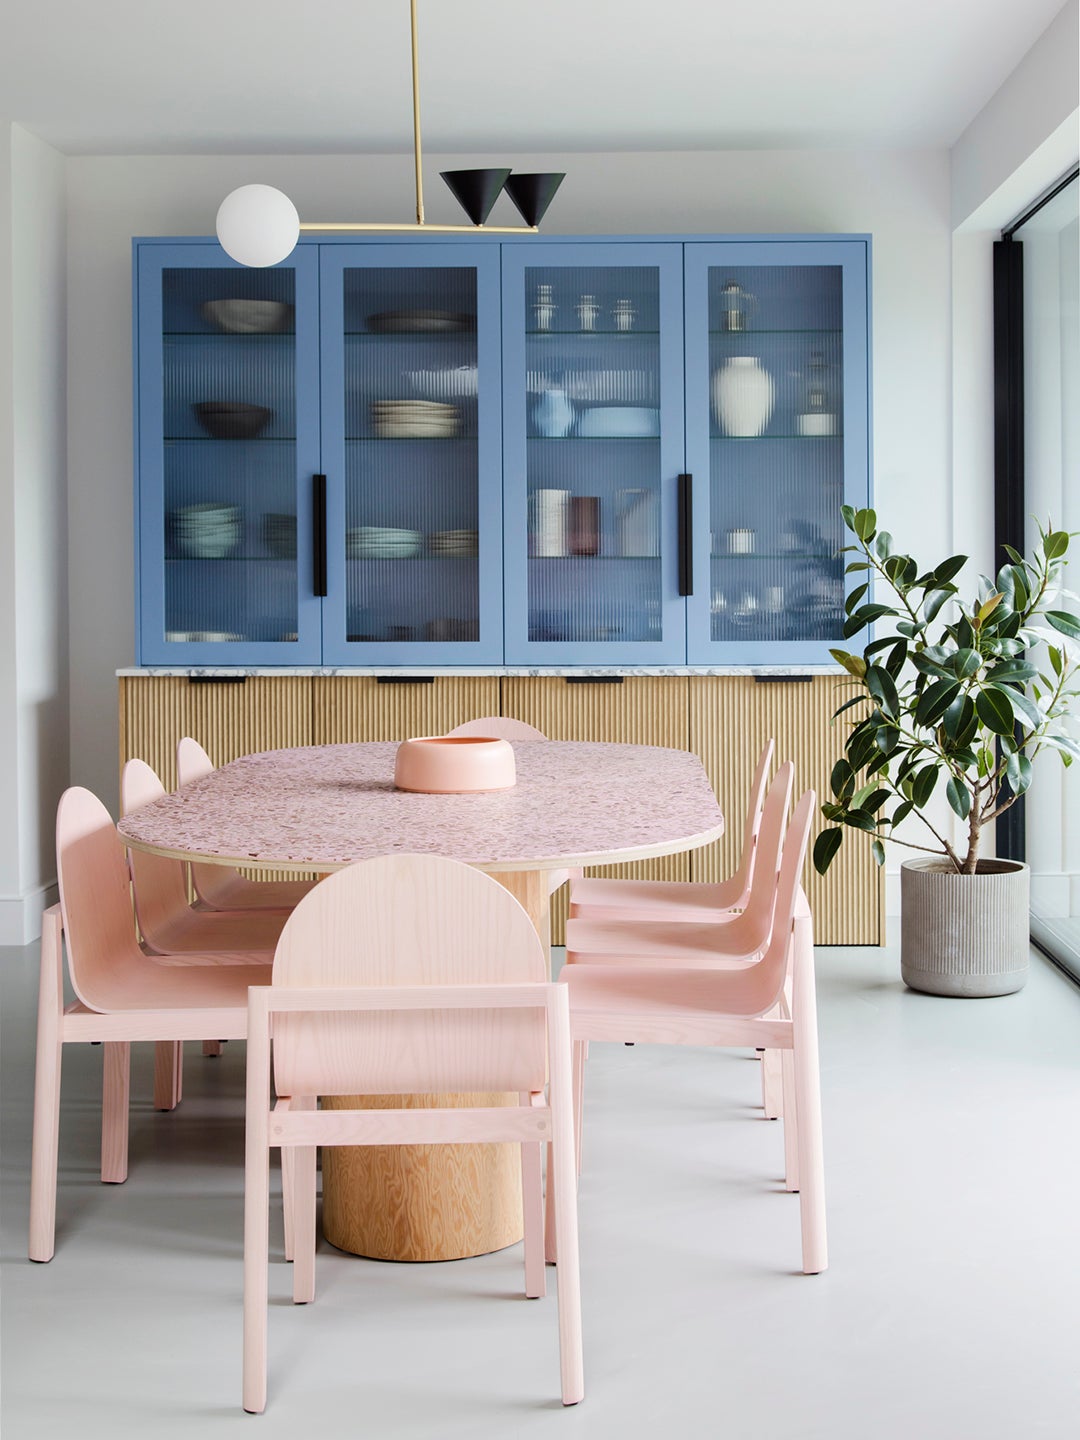 Dining room with pink dining set and blue cabinets.